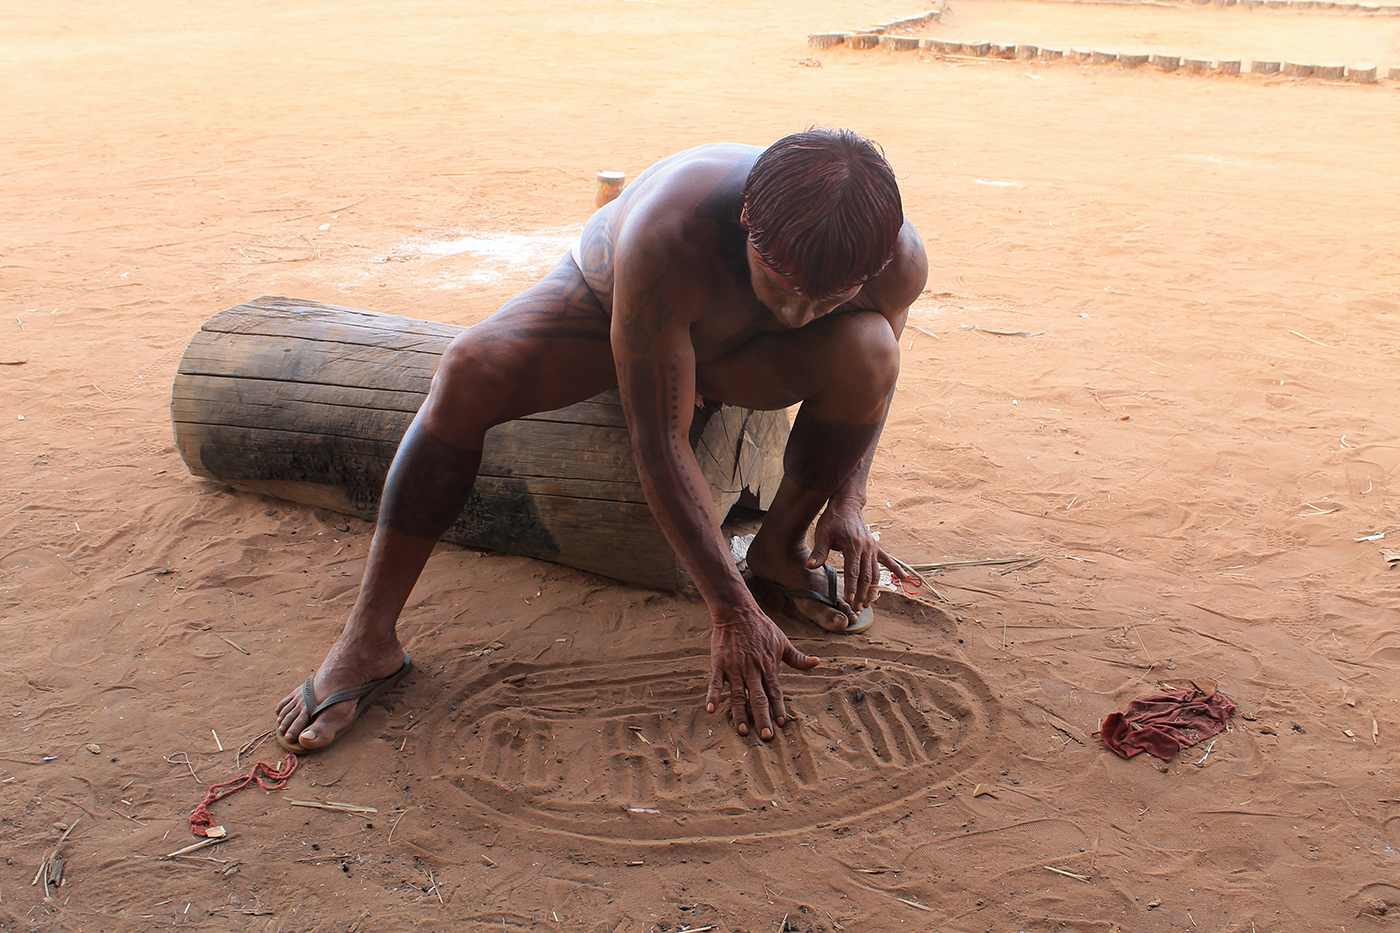 Chief Yapatsiama draws in the dirt to illustrate how an electrical grid will connect solar panels in his village.